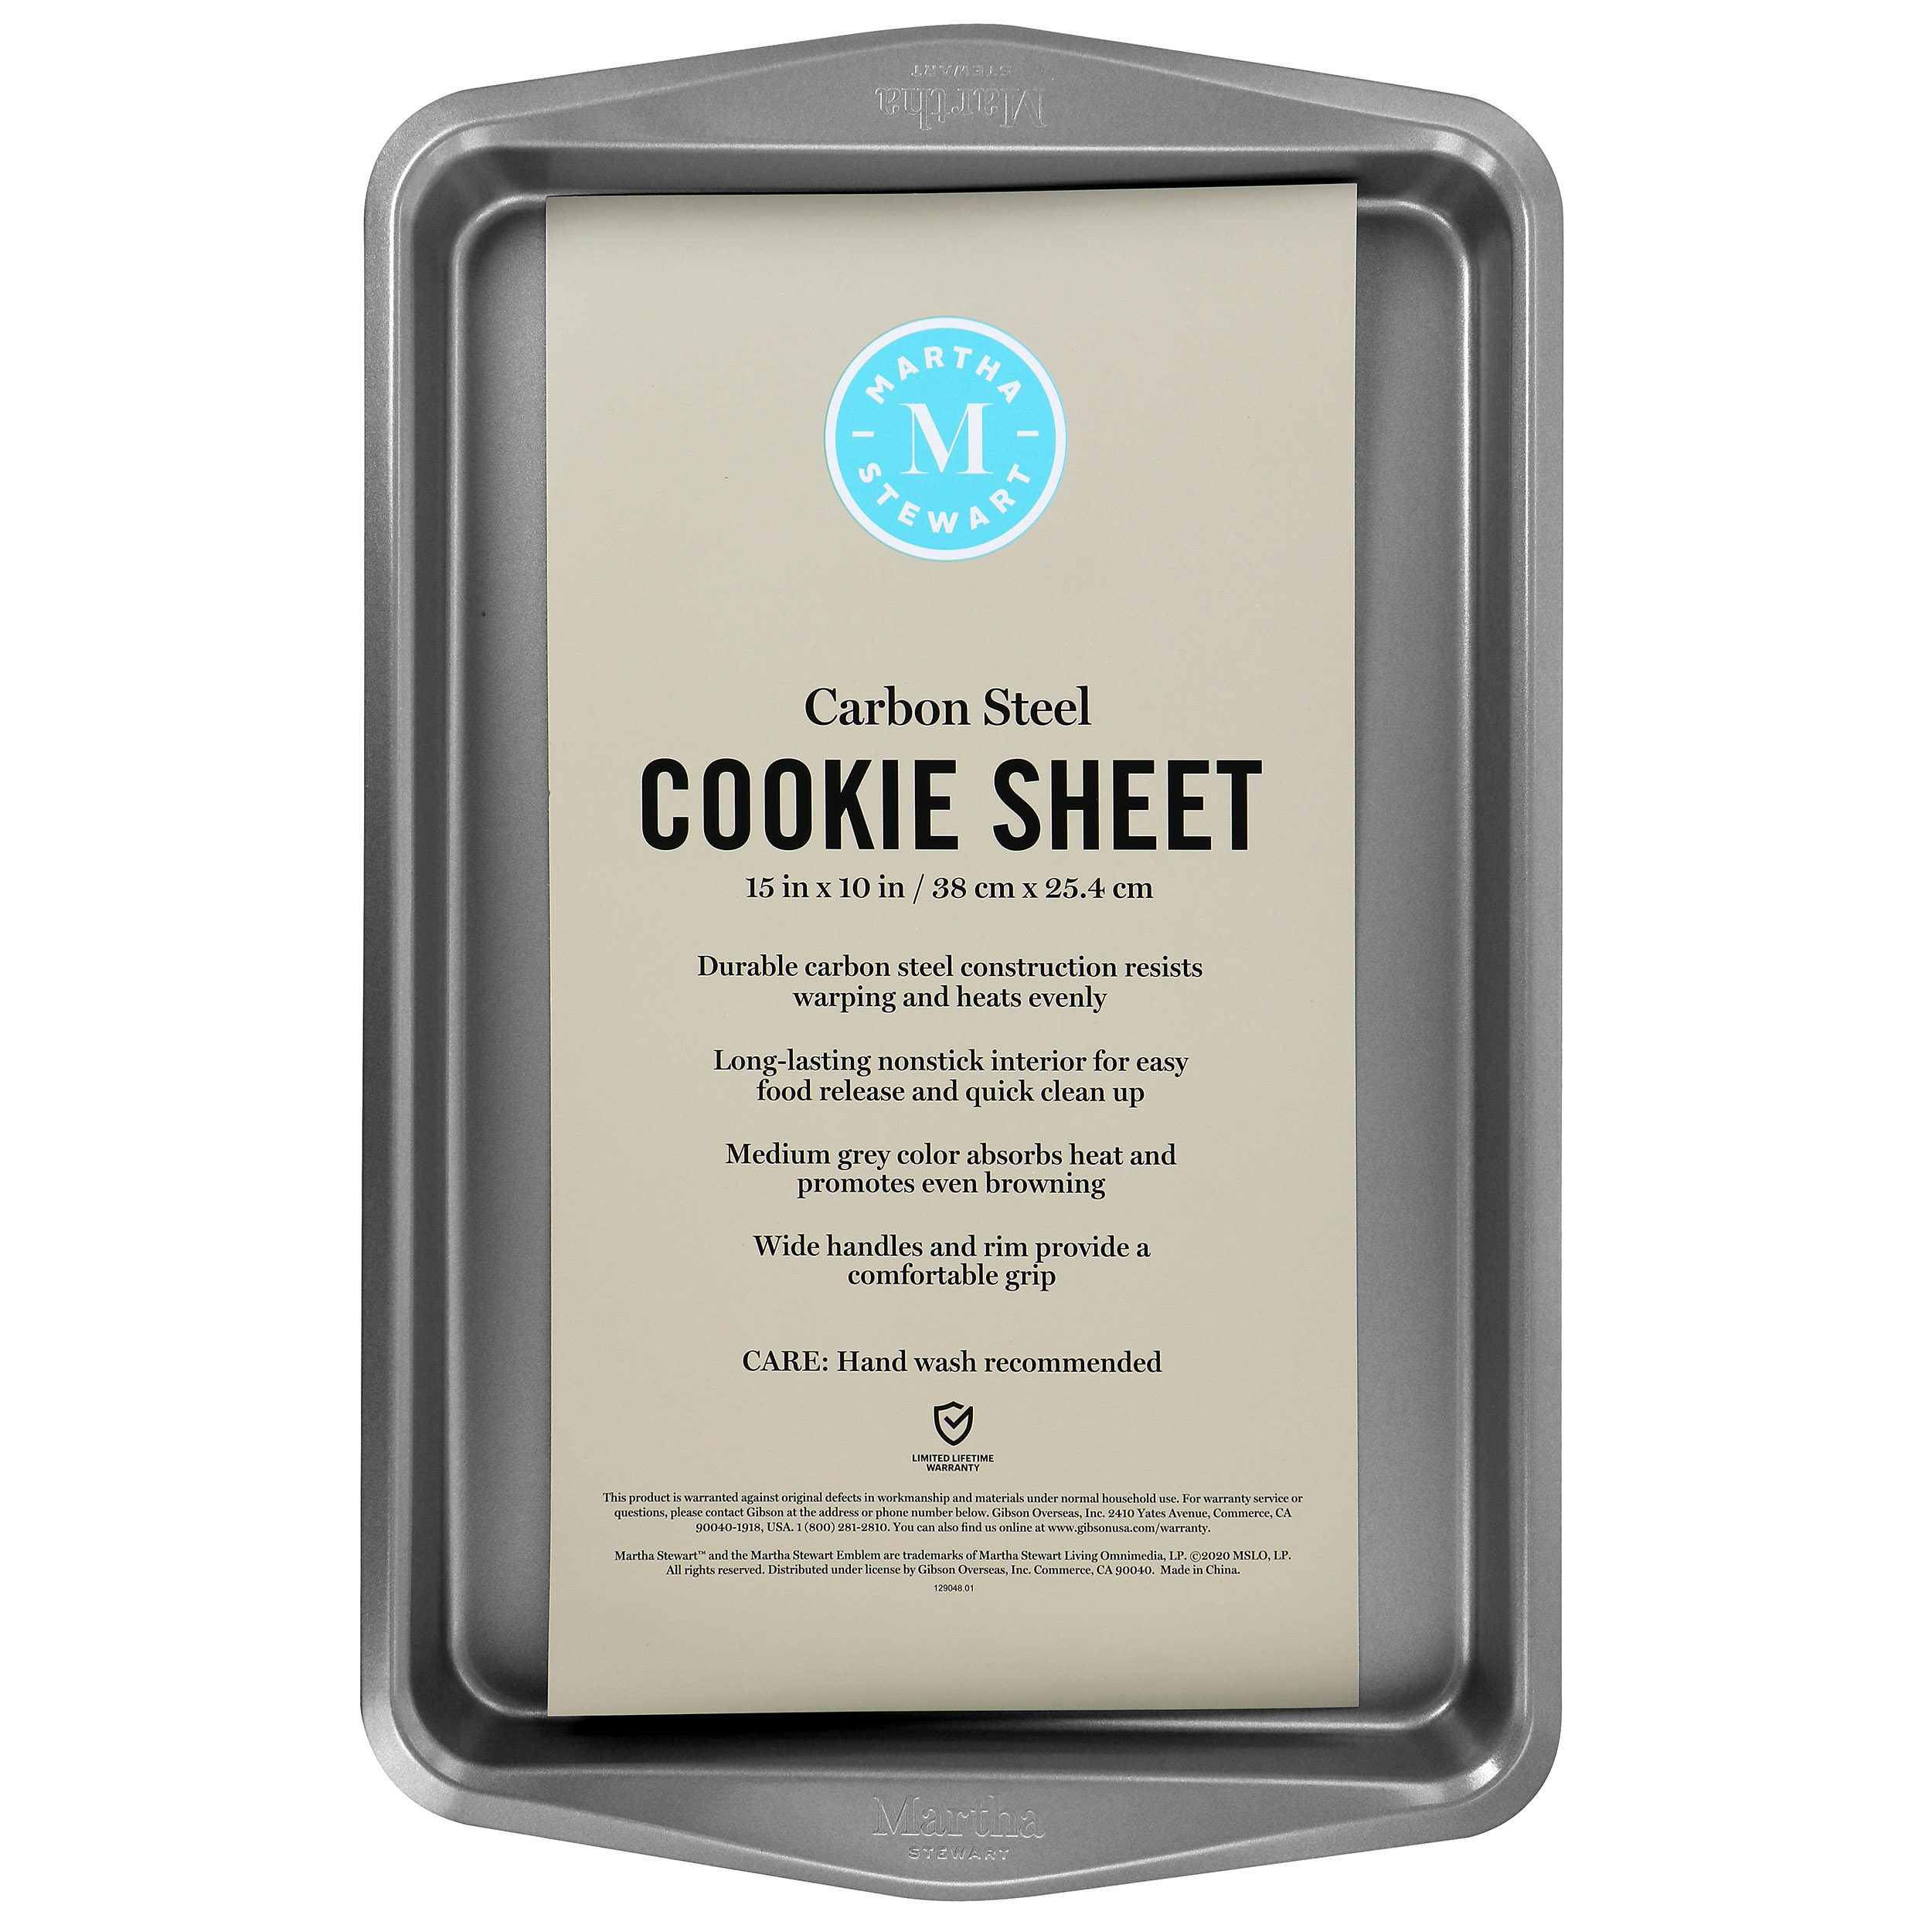 Oster 15 Inch x 10.5 Inch Baker's Glee Aluminum Cookie Sheet in 2023